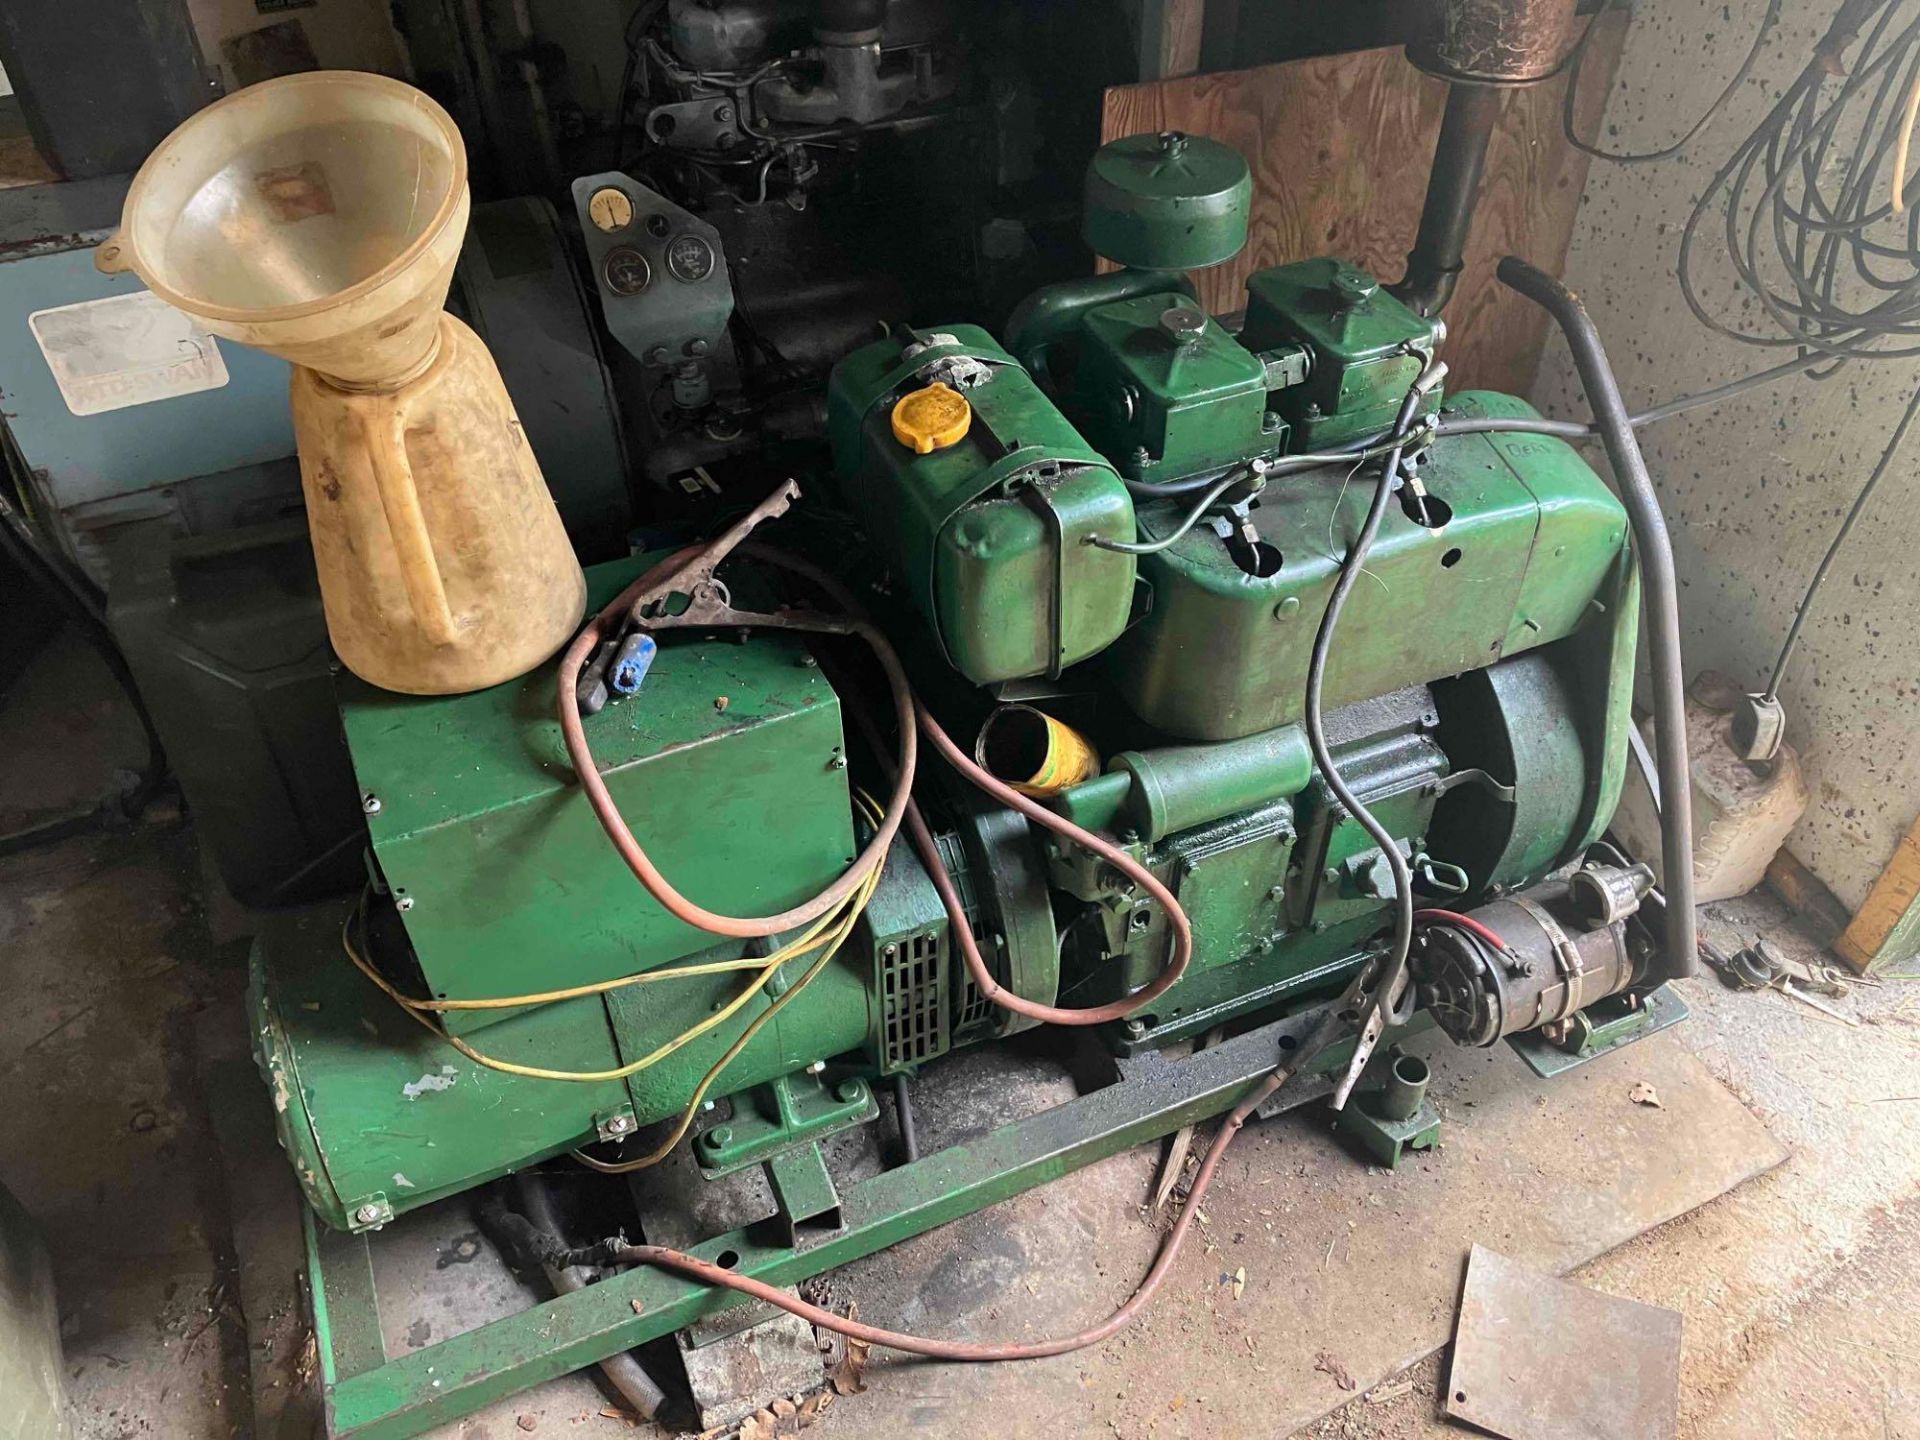 Petter stationary single phase twin cylinder diesel generator. Sold in situ, buyer to remove